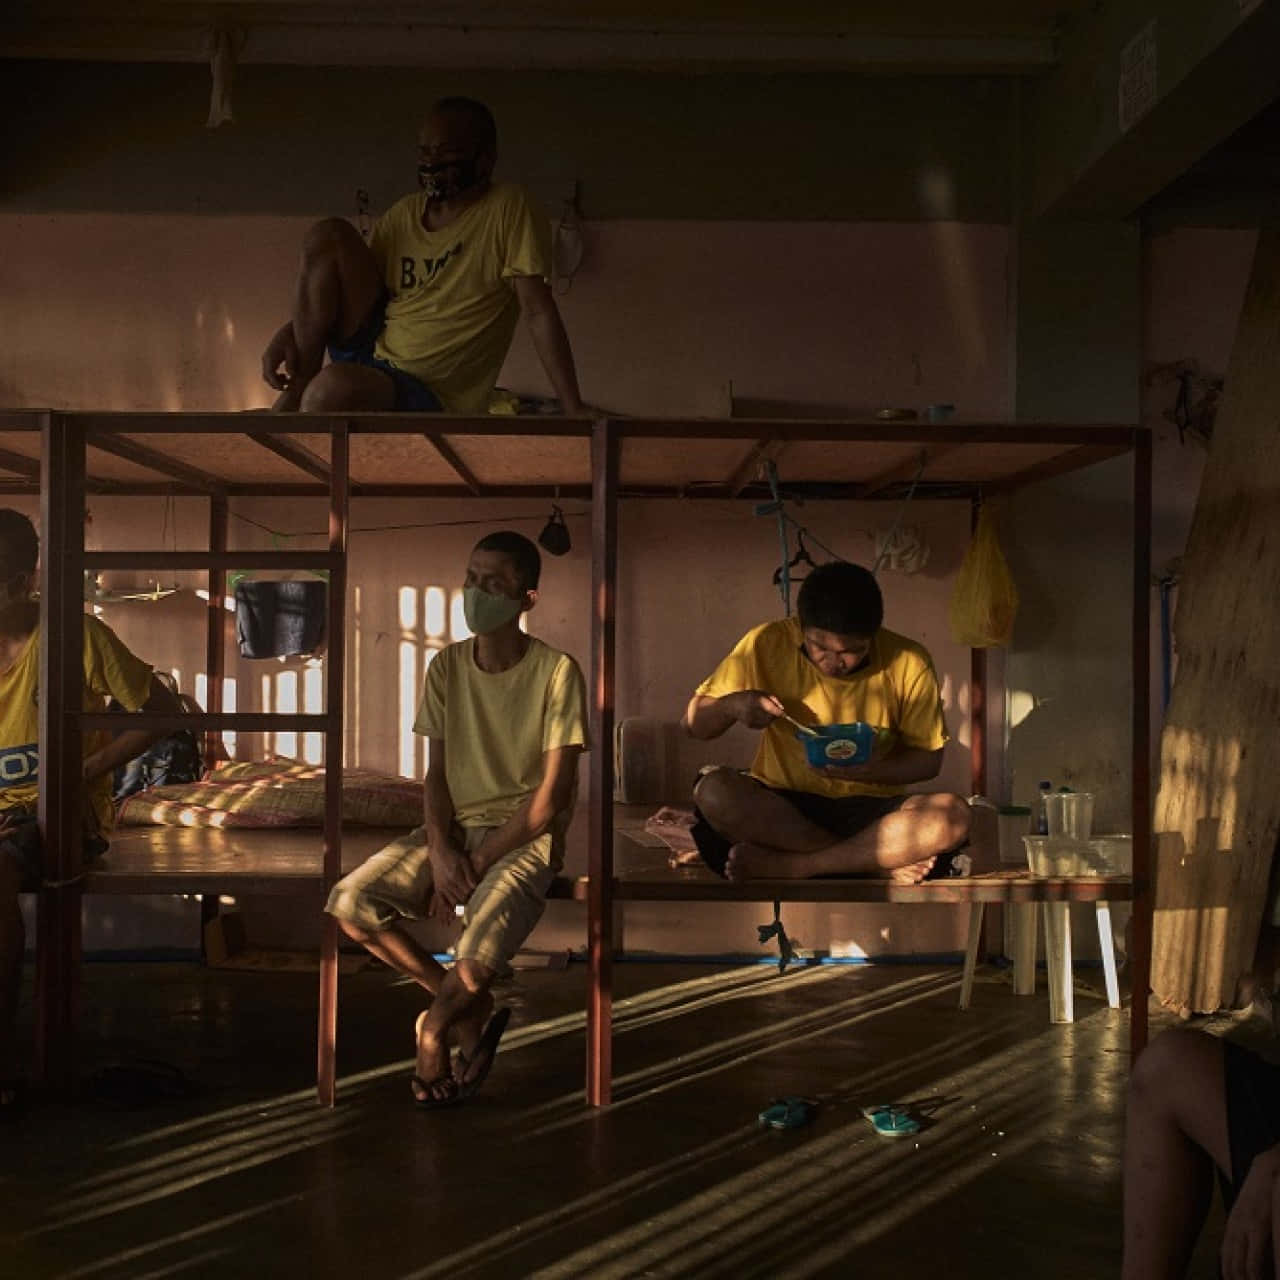 Jail Prisoners Wearing Yellow Shirts Picture